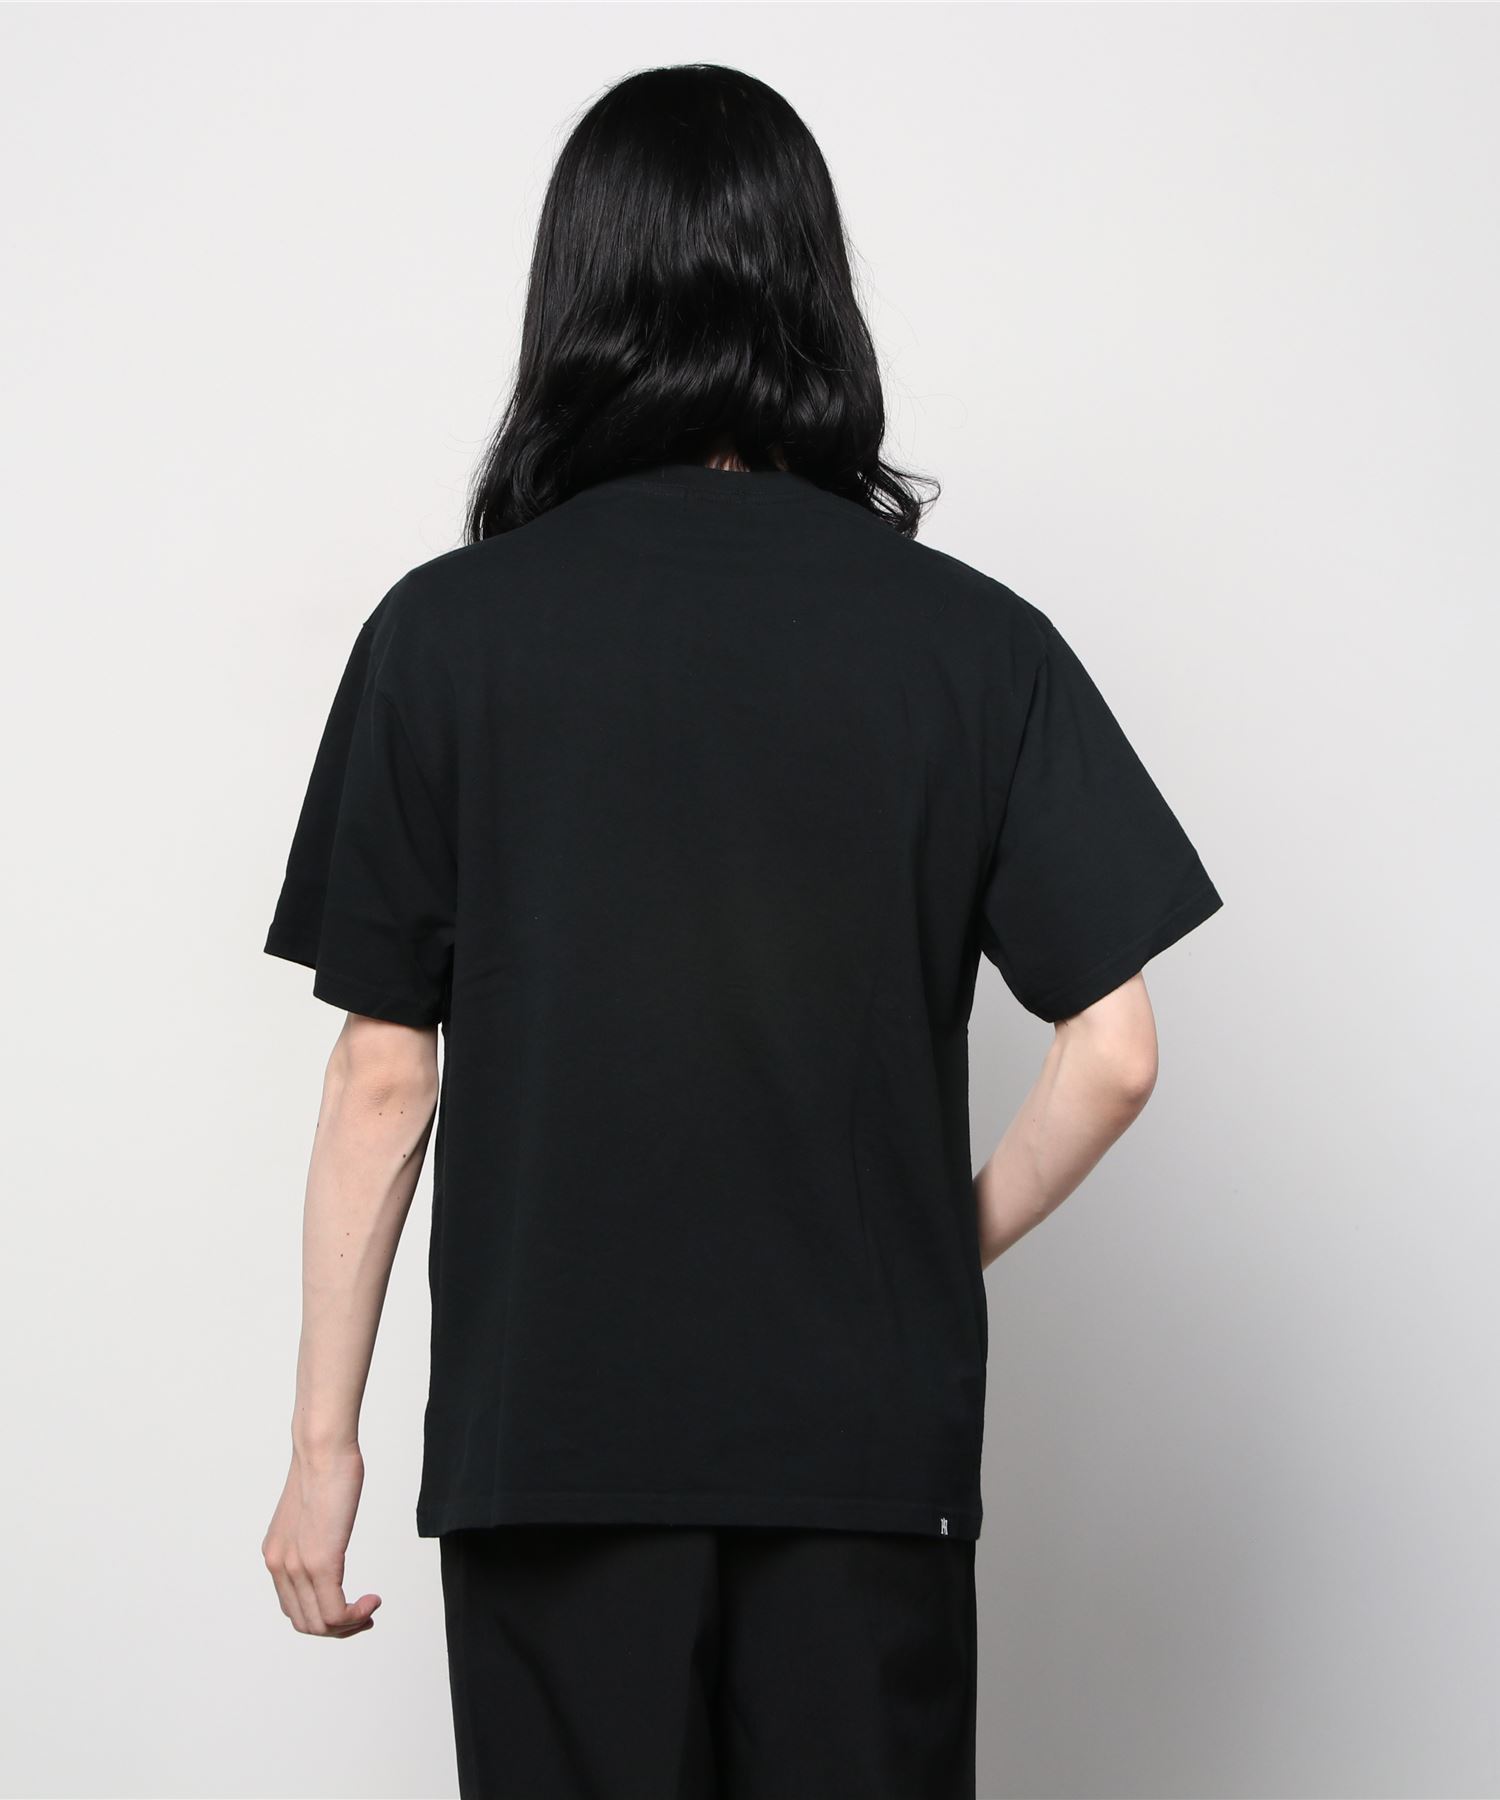 TAKE IT EASY Tシャツ HYSTERIC GLAMOUR MEN│HYSTERIC GLAMOUR ONLINE 